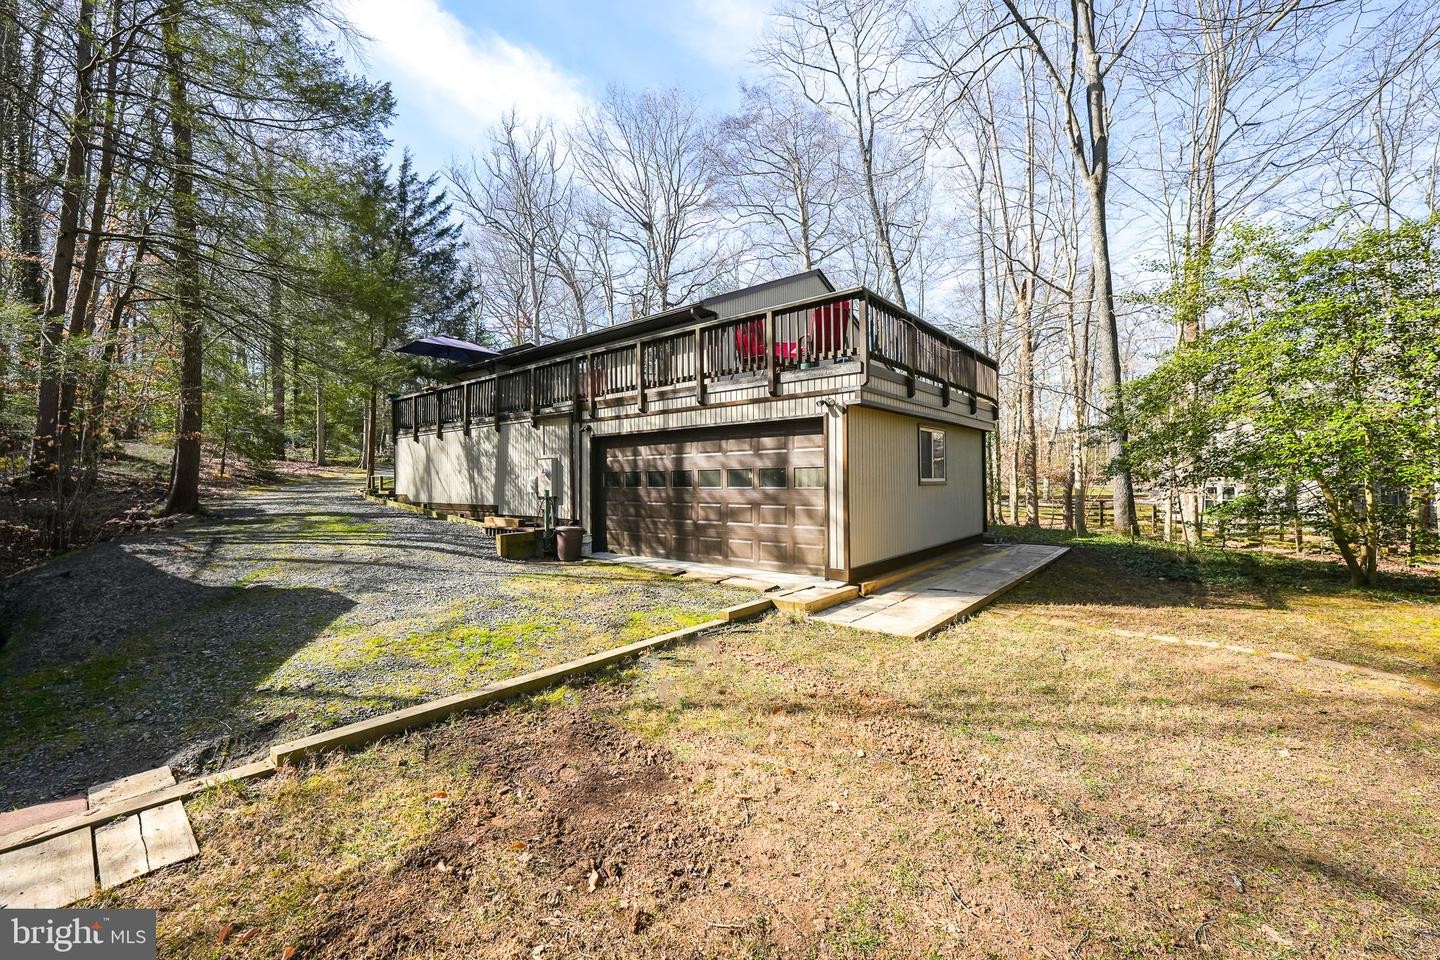 36. 6108 Occoquan Forest Dr